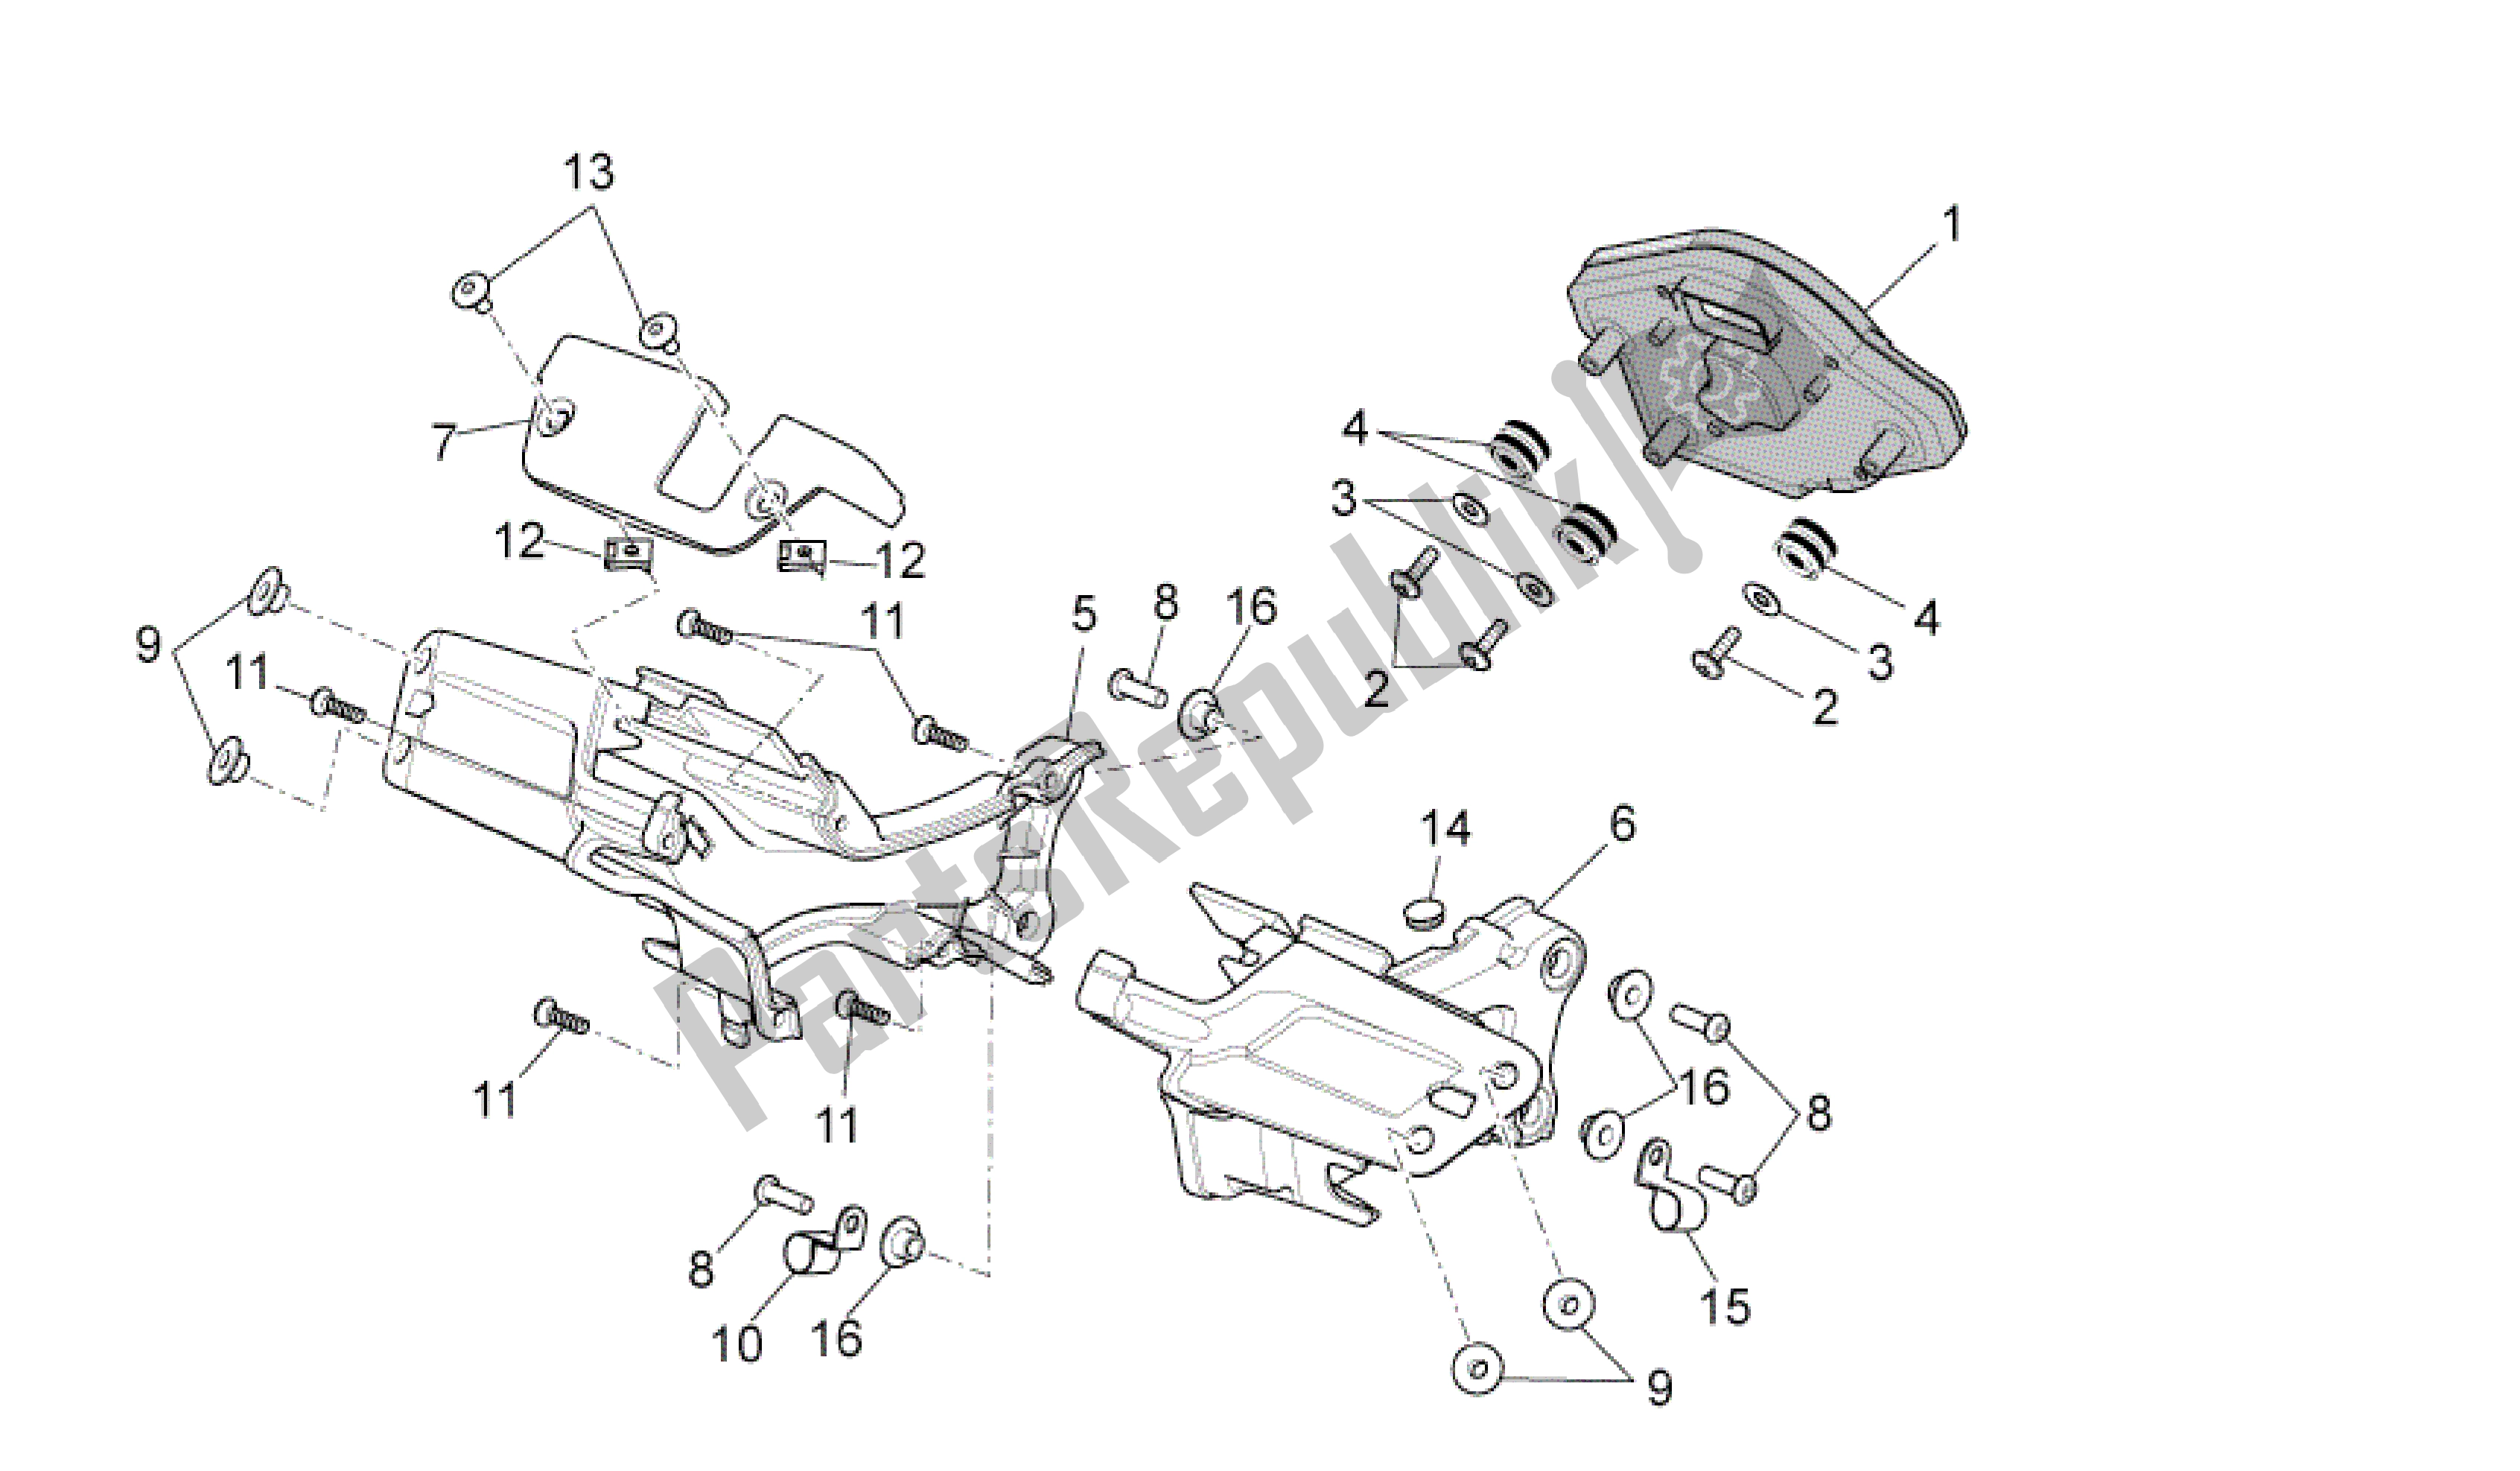 All parts for the Dashboard of the Aprilia RSV4 Aprc R ABS 3984 1000 2013